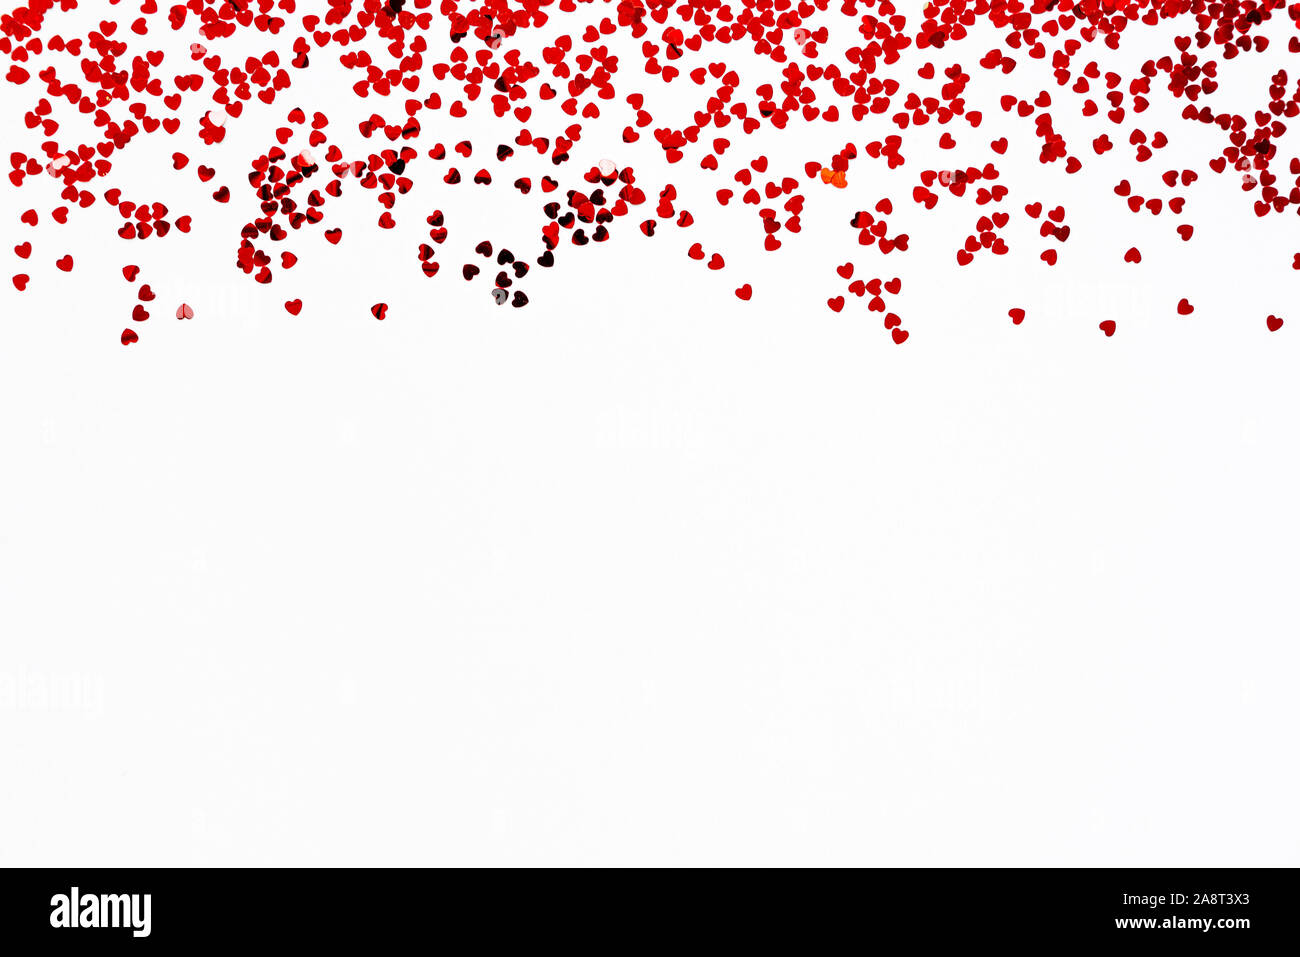 Valentine's Day background - a frame of scattered heart shaped confetti over white background. Stock Photo